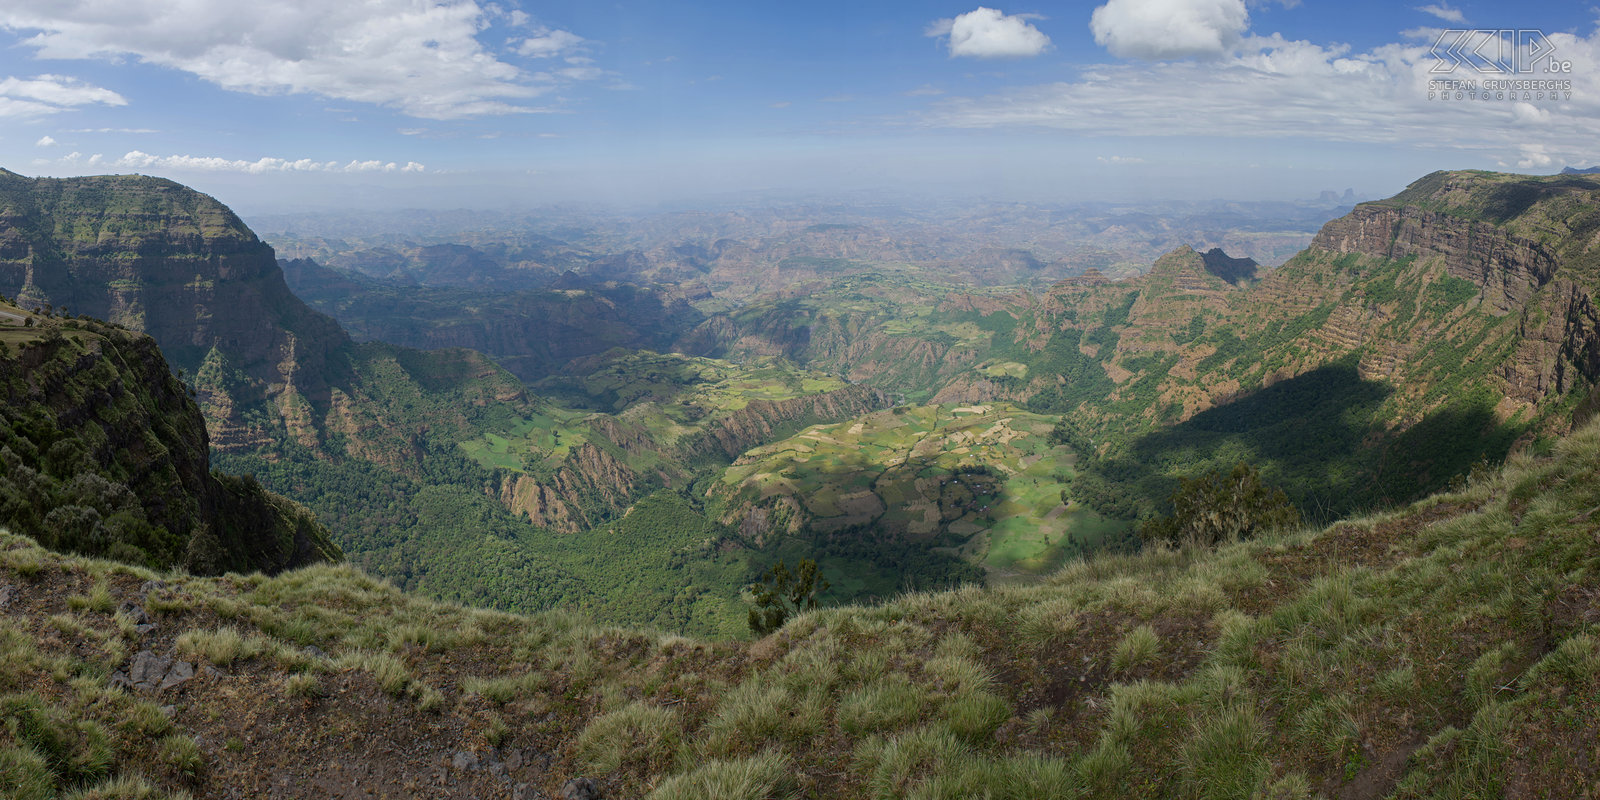 Simien Mountains  The beautiful volcanic Simien Mountains National Park has spectacular canyons, fantastic rock formations, unique wildlife and so we undertook a 5-days trekking. Our luggage, tents and food were transported by mules. The first day we hiked to the Sankaber camp at 3400m altitude. Stefan Cruysberghs